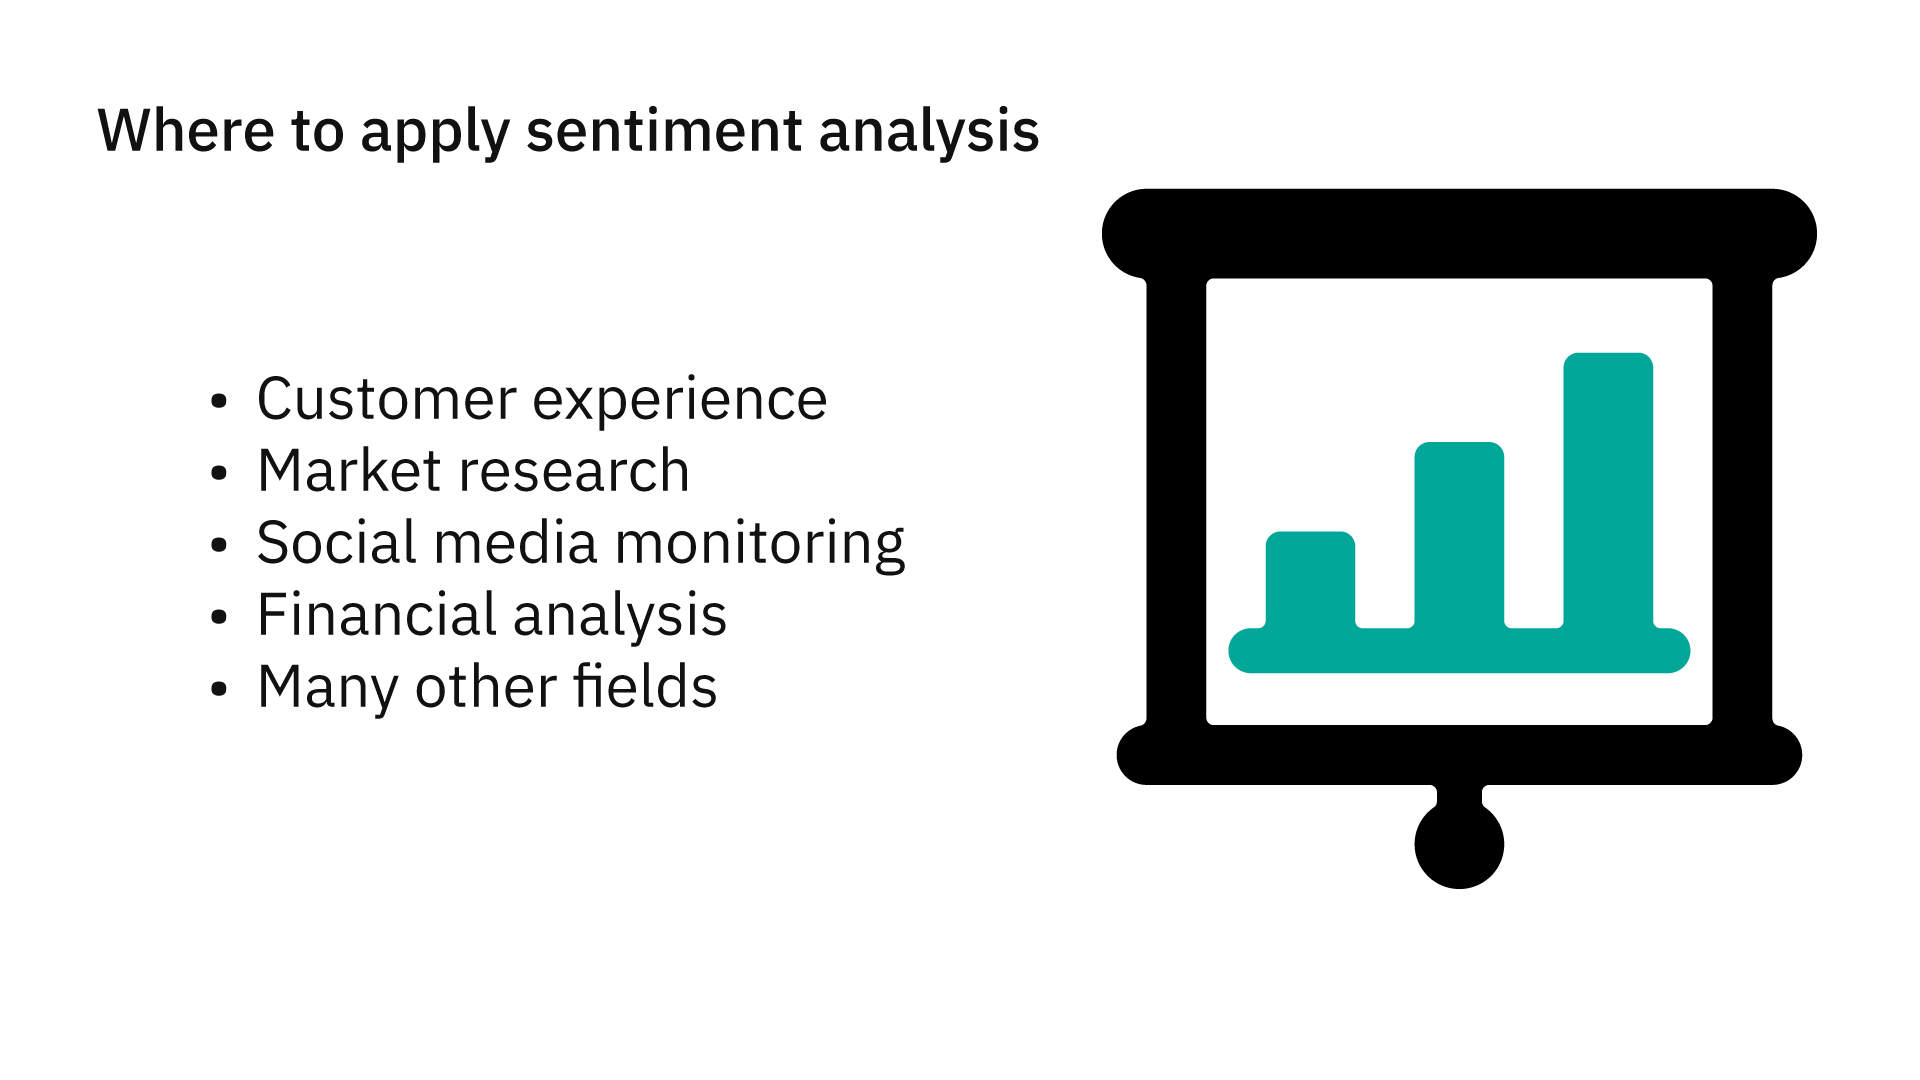 Where to apply sentiment analysis